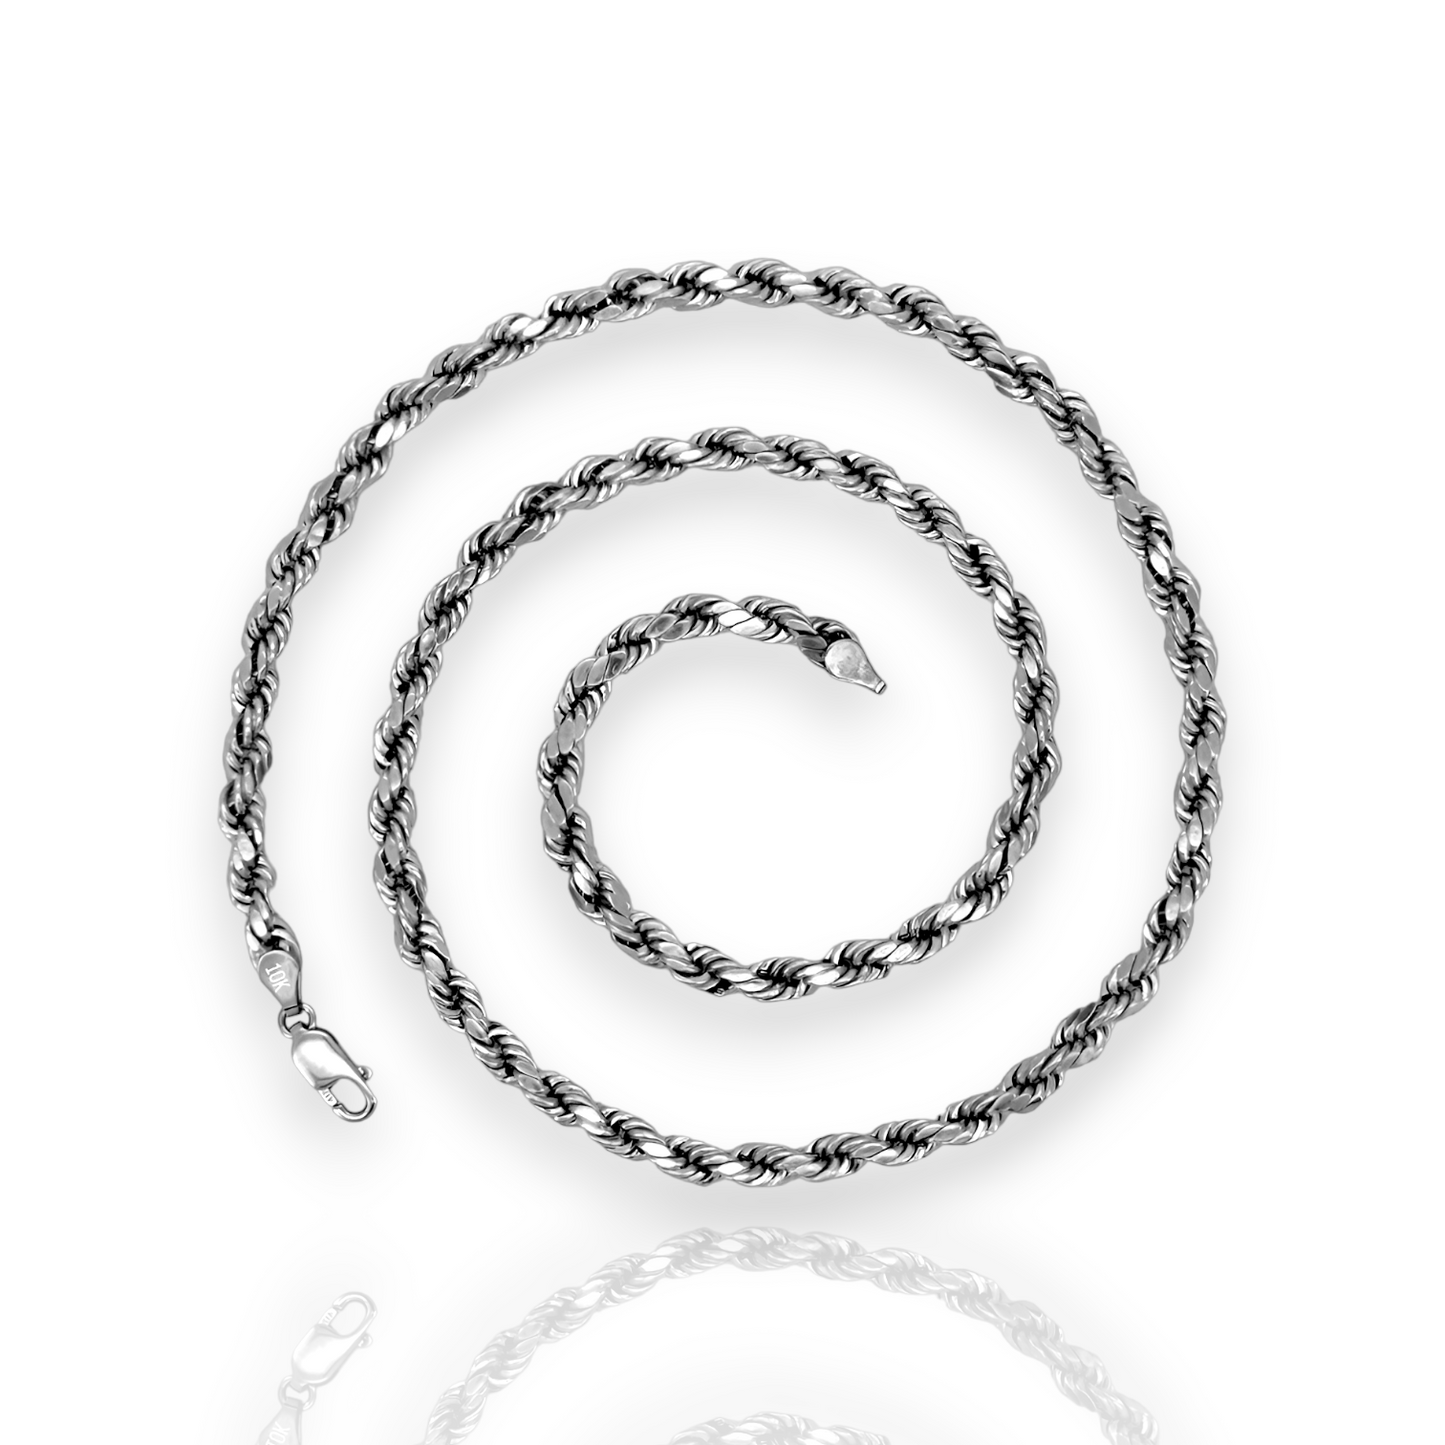 Rope Chain Necklace - 10K White Gold - Solid